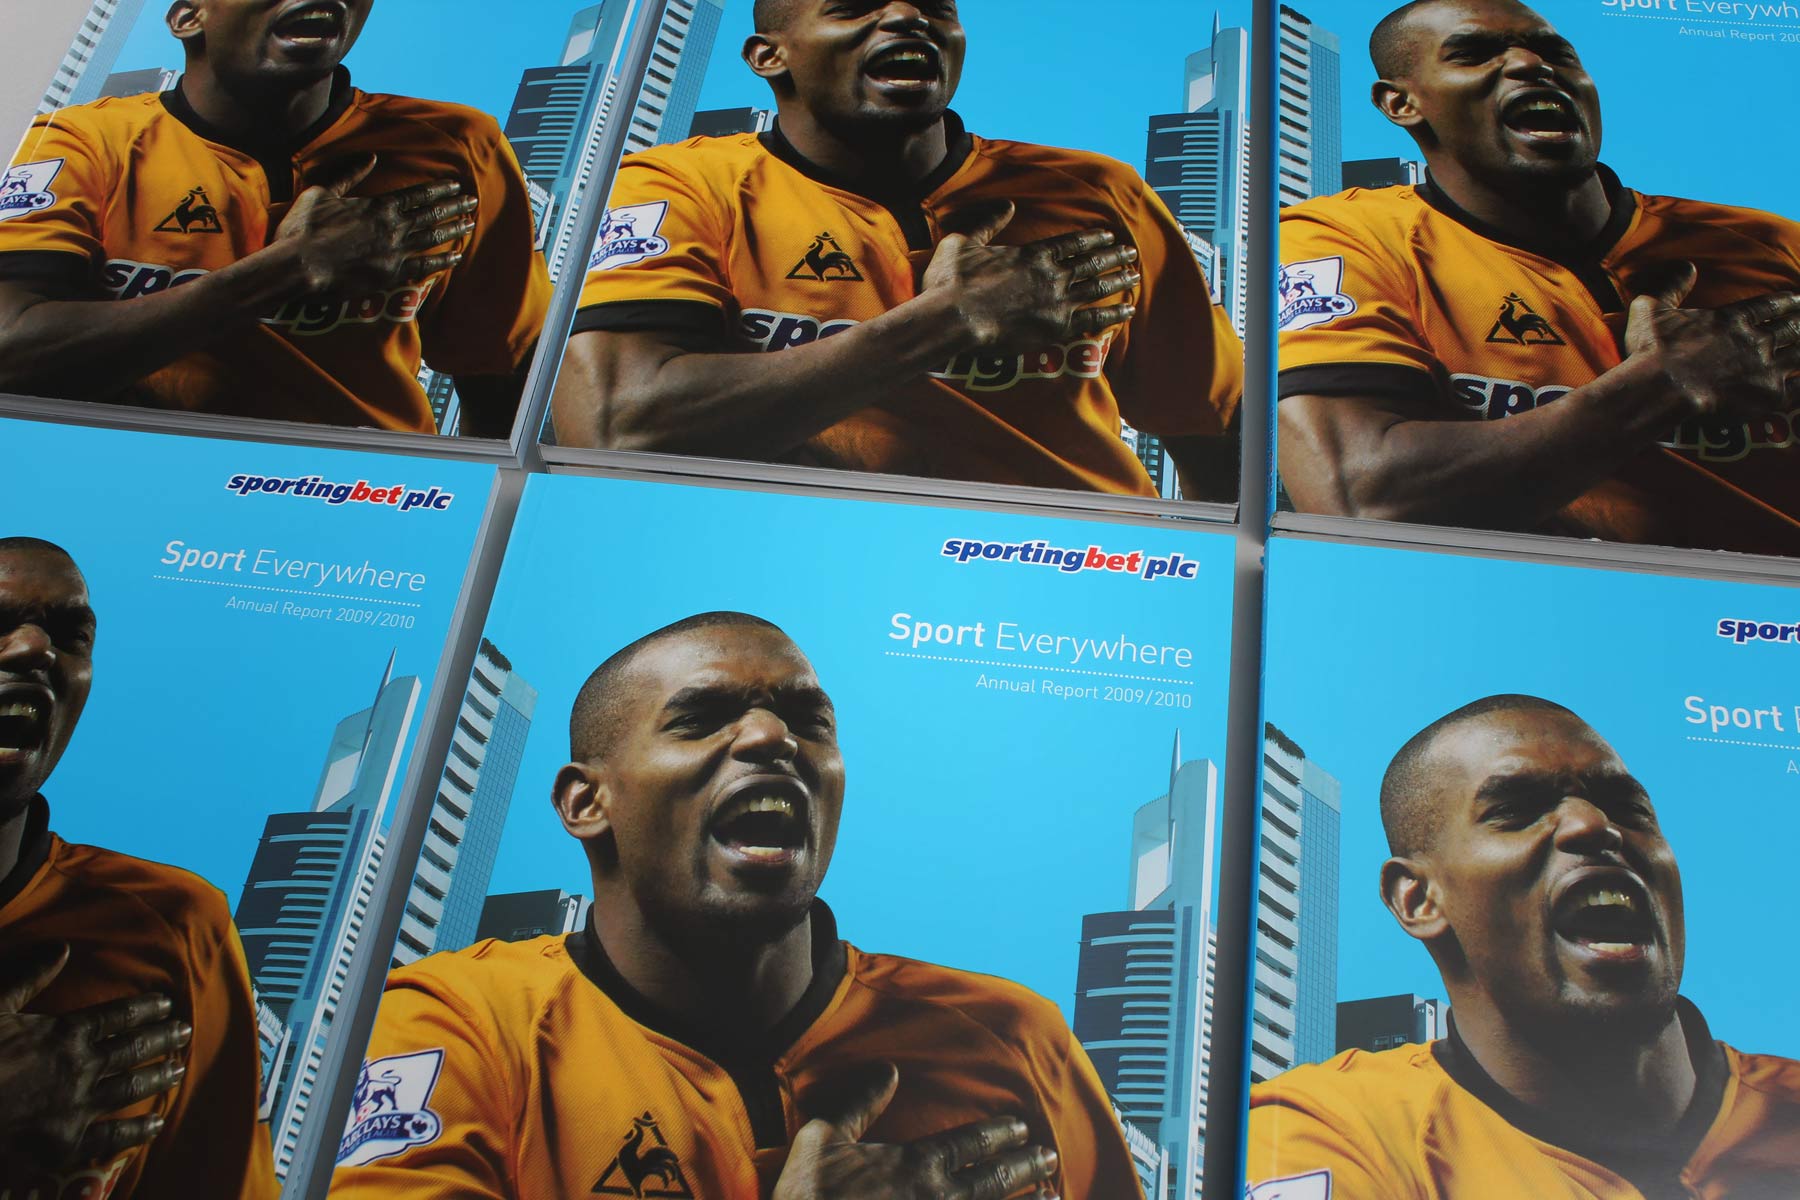 The cover of the report shows the Wolverhampton strip and Sportingbet sponsorship - A key promotional part of the brand.